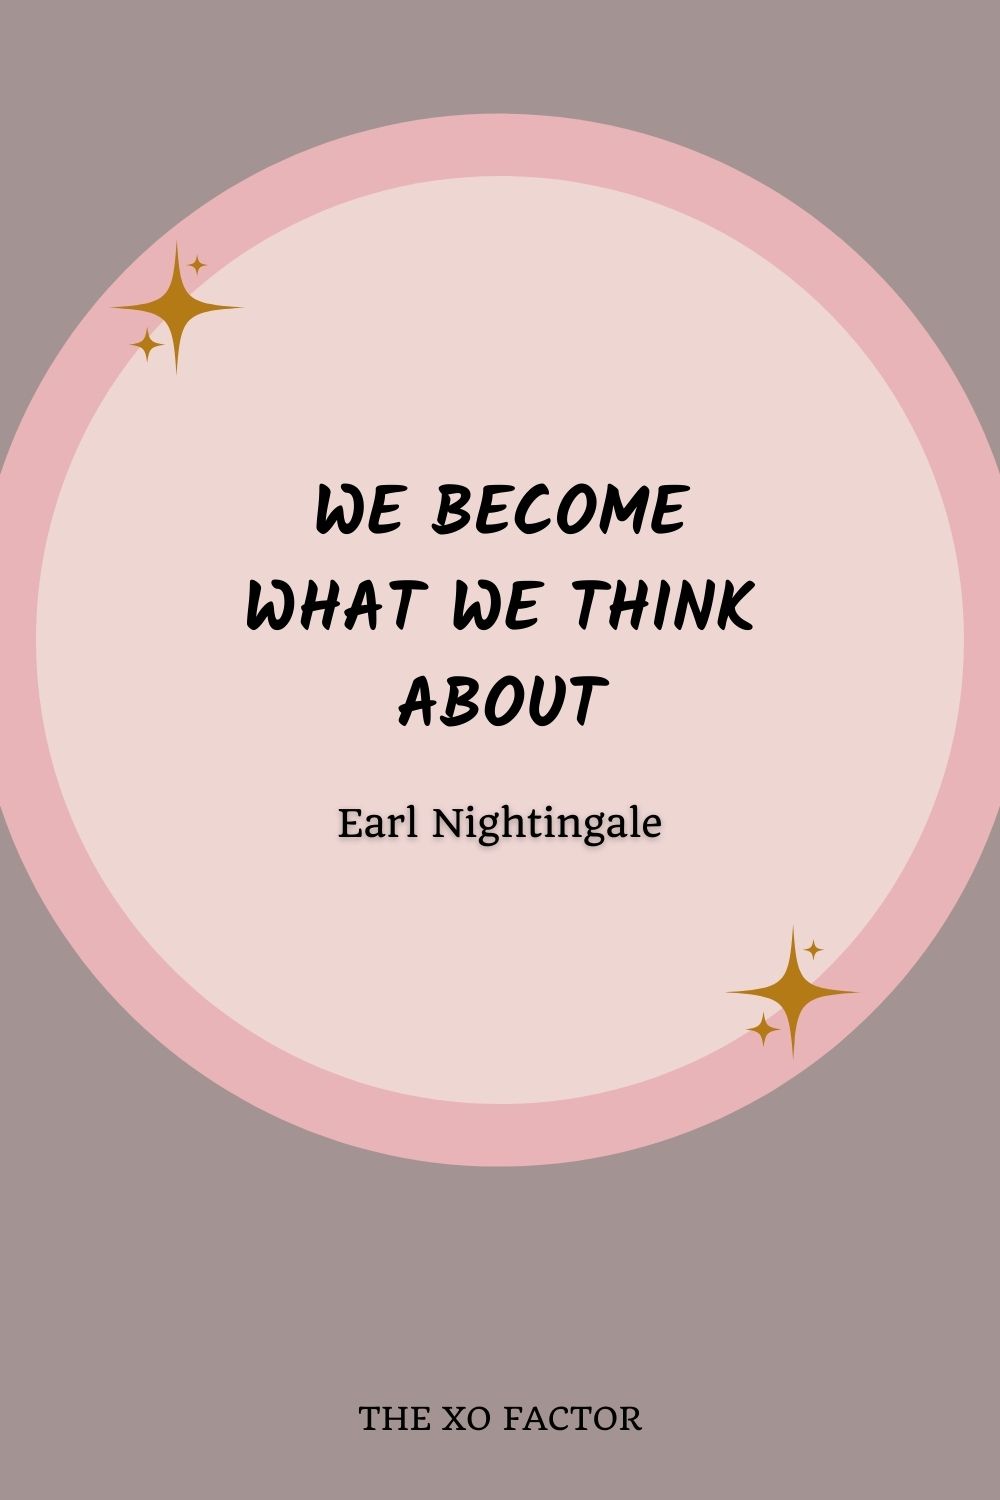 We become what we think about” – Earl Nightingale